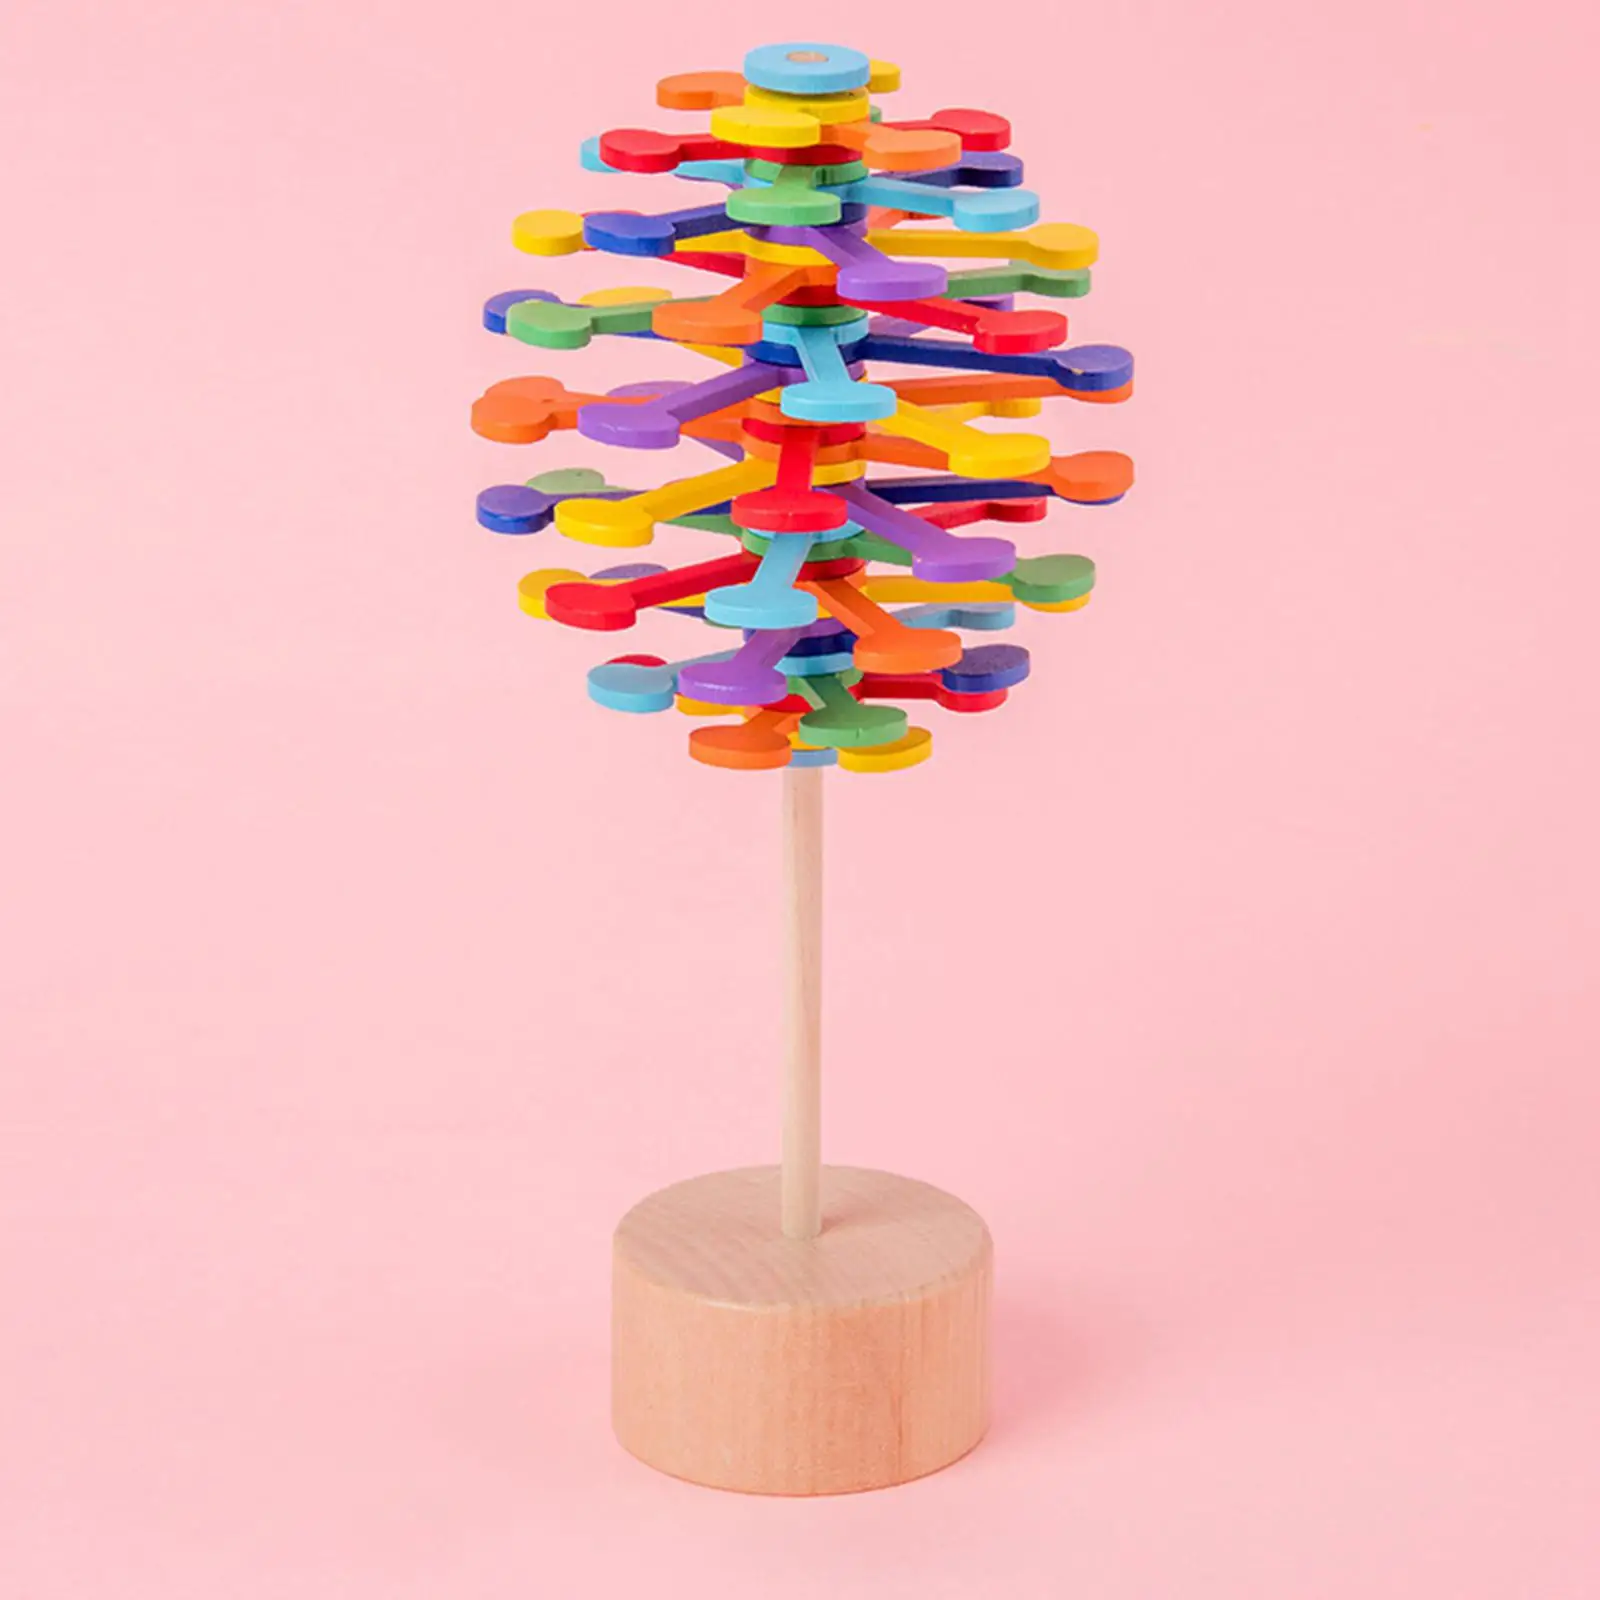 Creative Multicolor Rotating Spiral Lollipop Tricks Props Leaf Shaped Wooden Rotary Spiral Lollipop for Office Exercise Adults